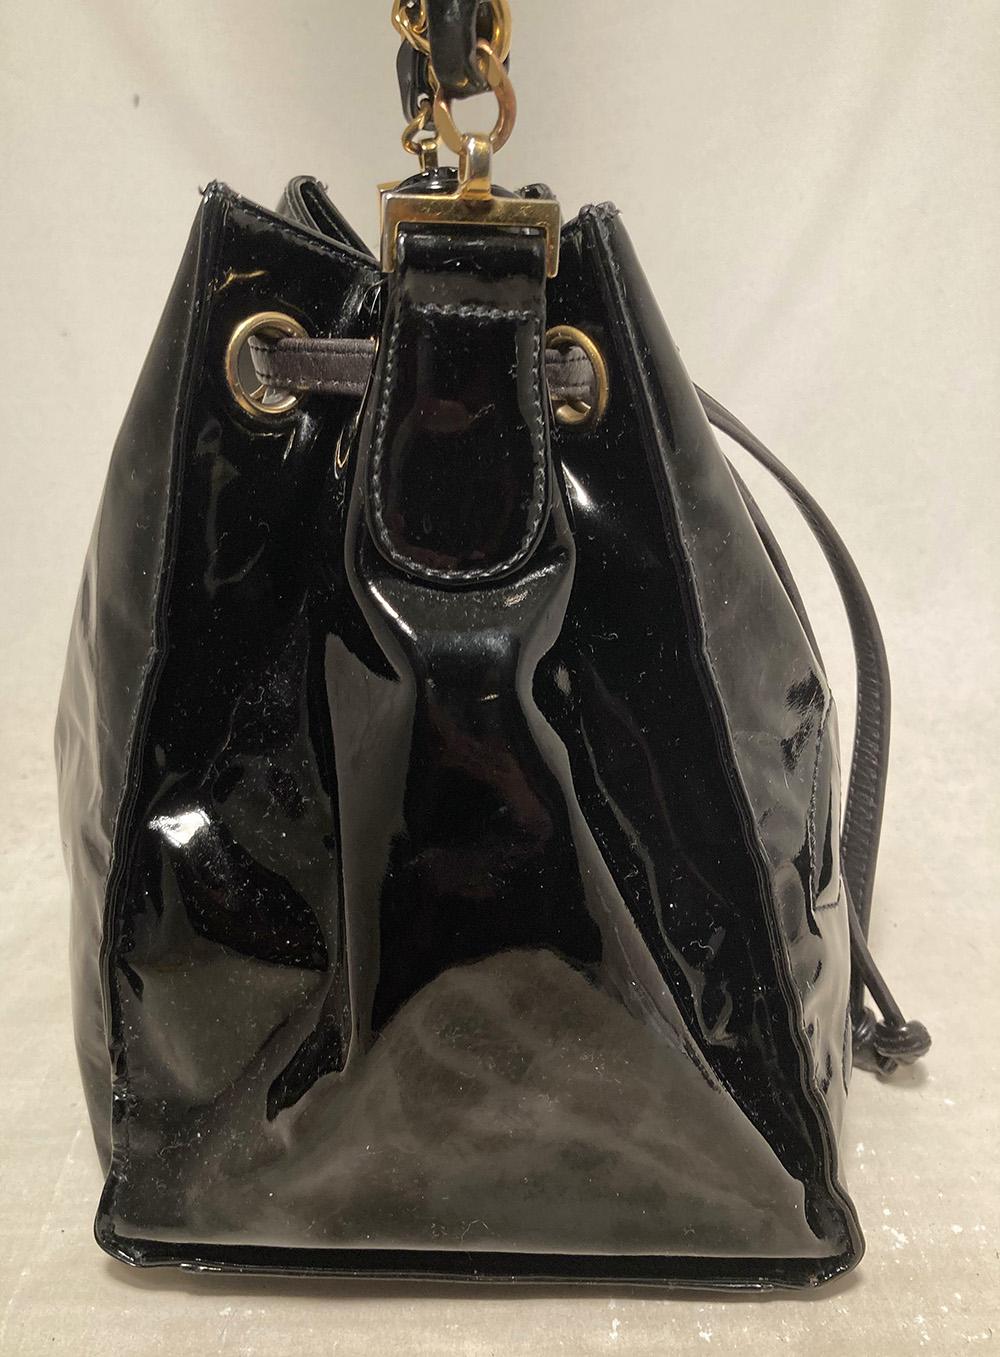 Chanel Black Patent Drawstring Bucket Bag in very good condition